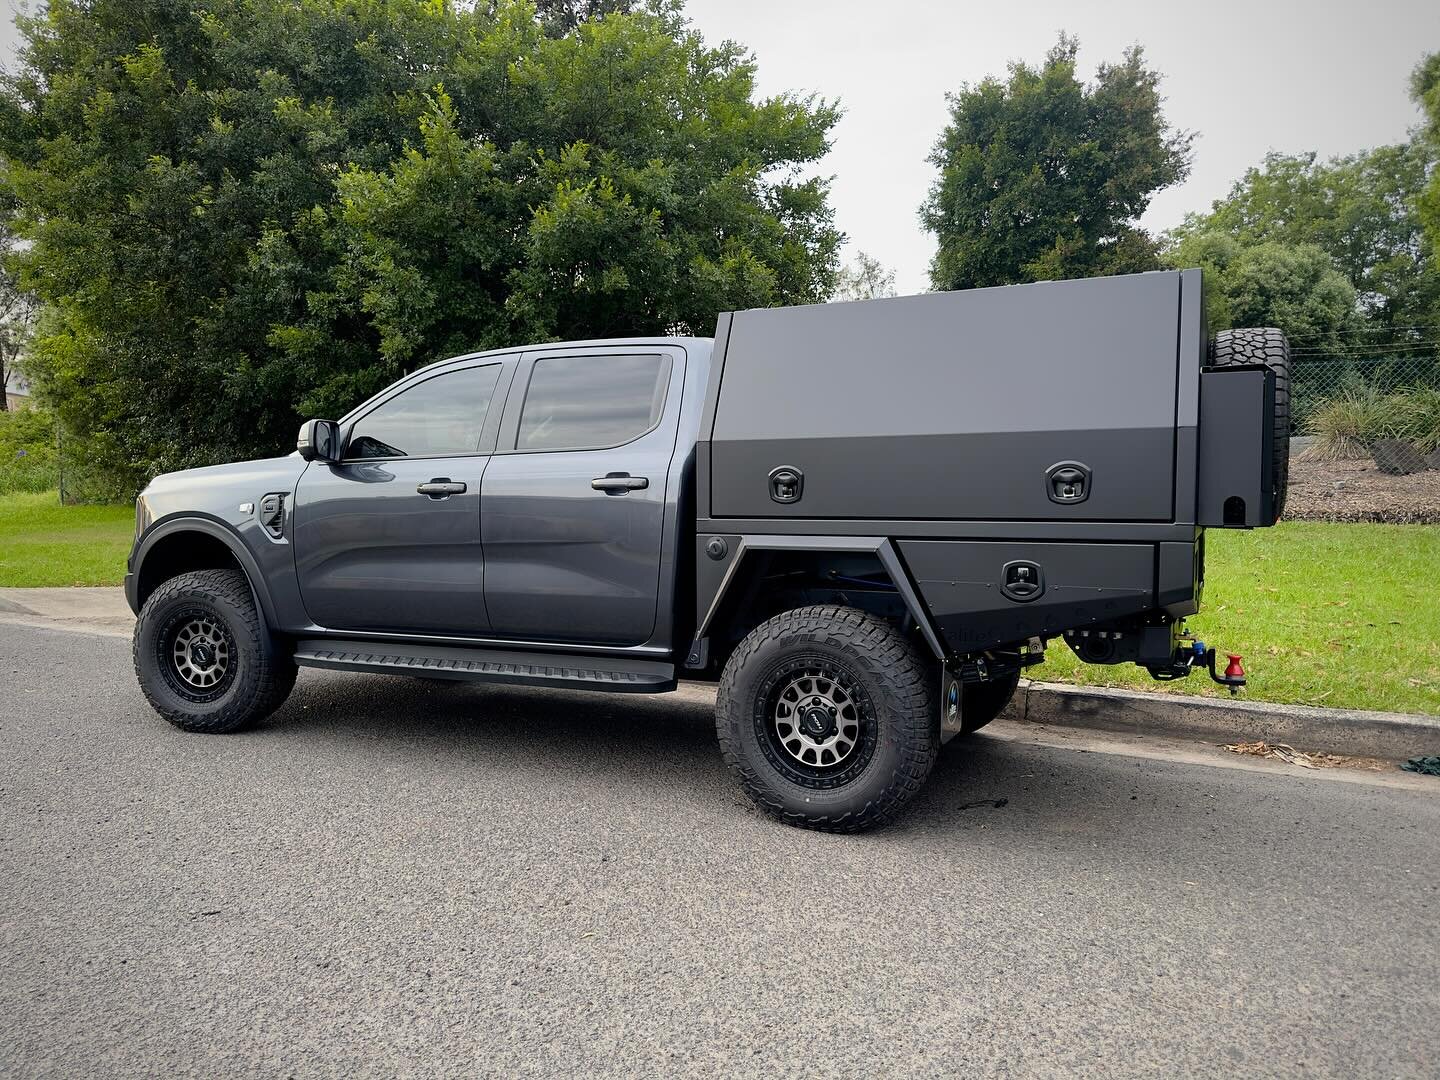 Next Gen Ranger complete 

FEATURING
-Full time chassis mount body 
-Under tray tool boxes with dress panels 
-Flared mudguards 
-Flush mount fuel filler
-Sealed trundle drawer
-Lockable jerry can holder 
-Spare wheel cradle
-70L water tank 
-Sensor 